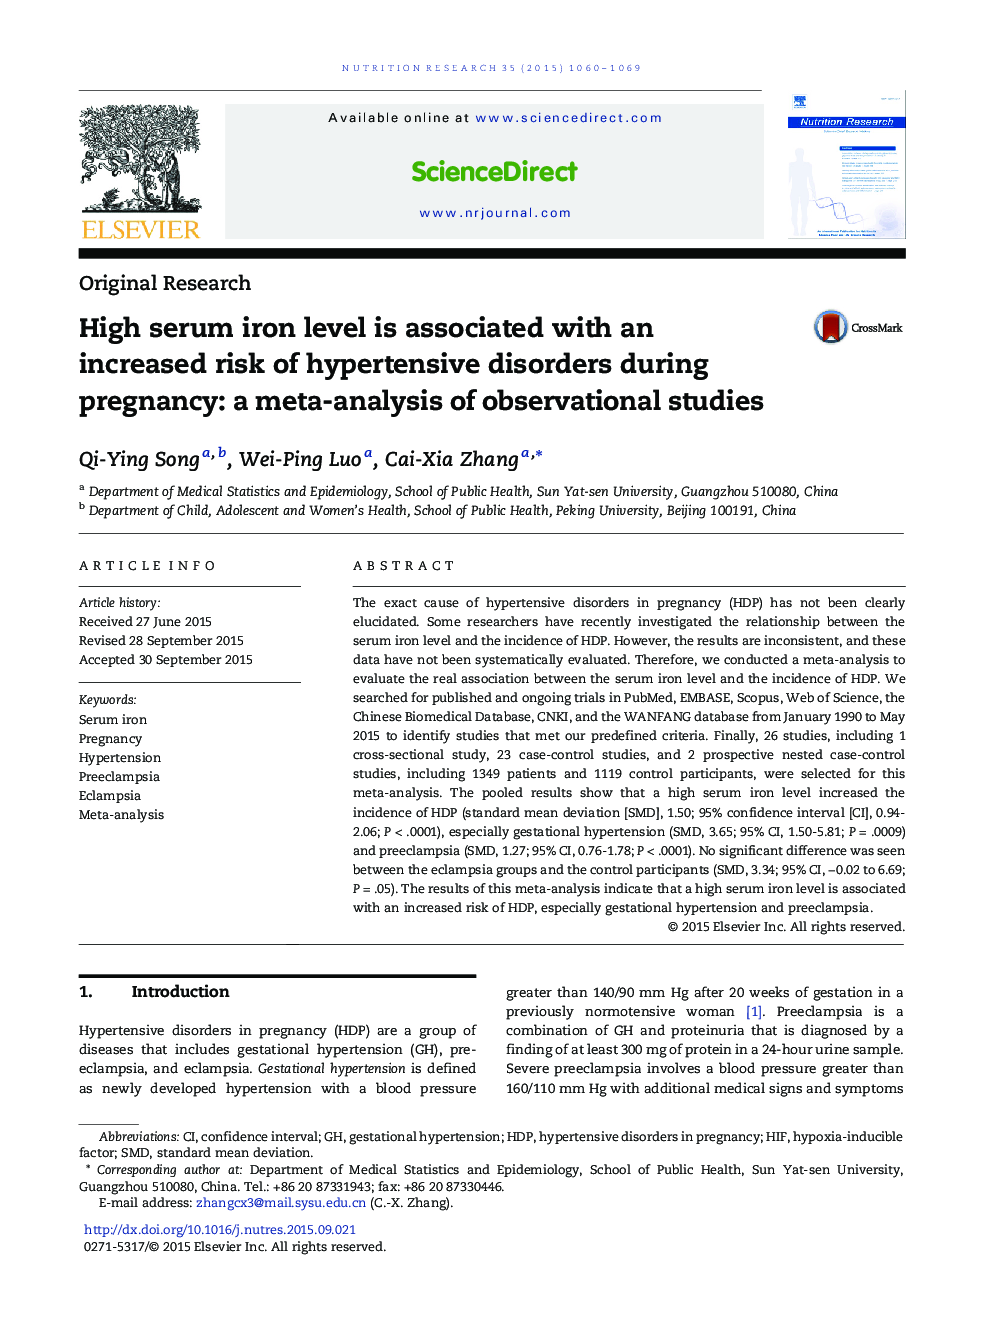 High serum iron level is associated with an increased risk of hypertensive disorders during pregnancy: a meta-analysis of observational studies